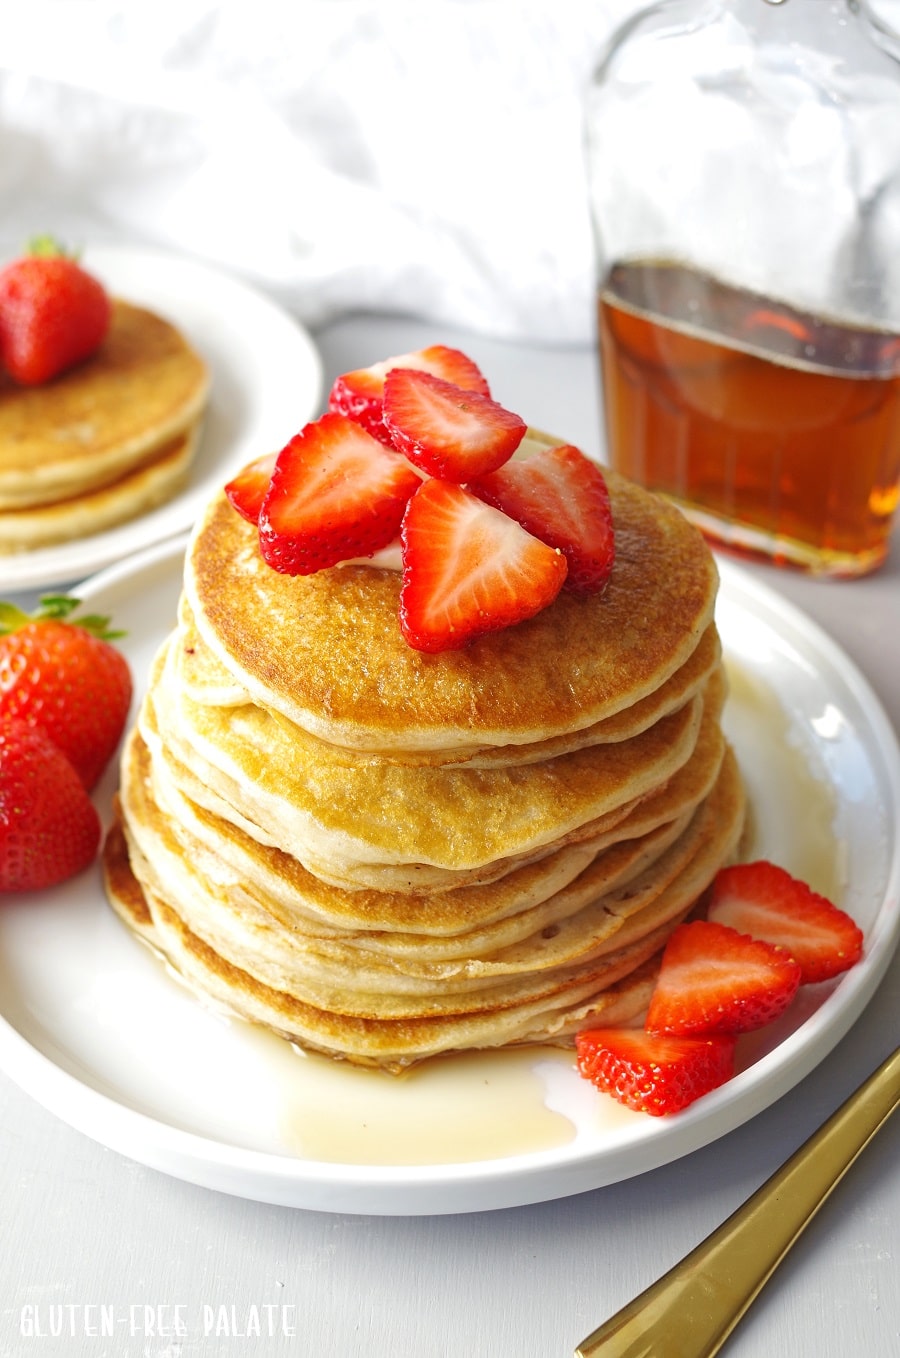 Fluffy Gluten-Free Pancakes - Mix Now or Save for Later!